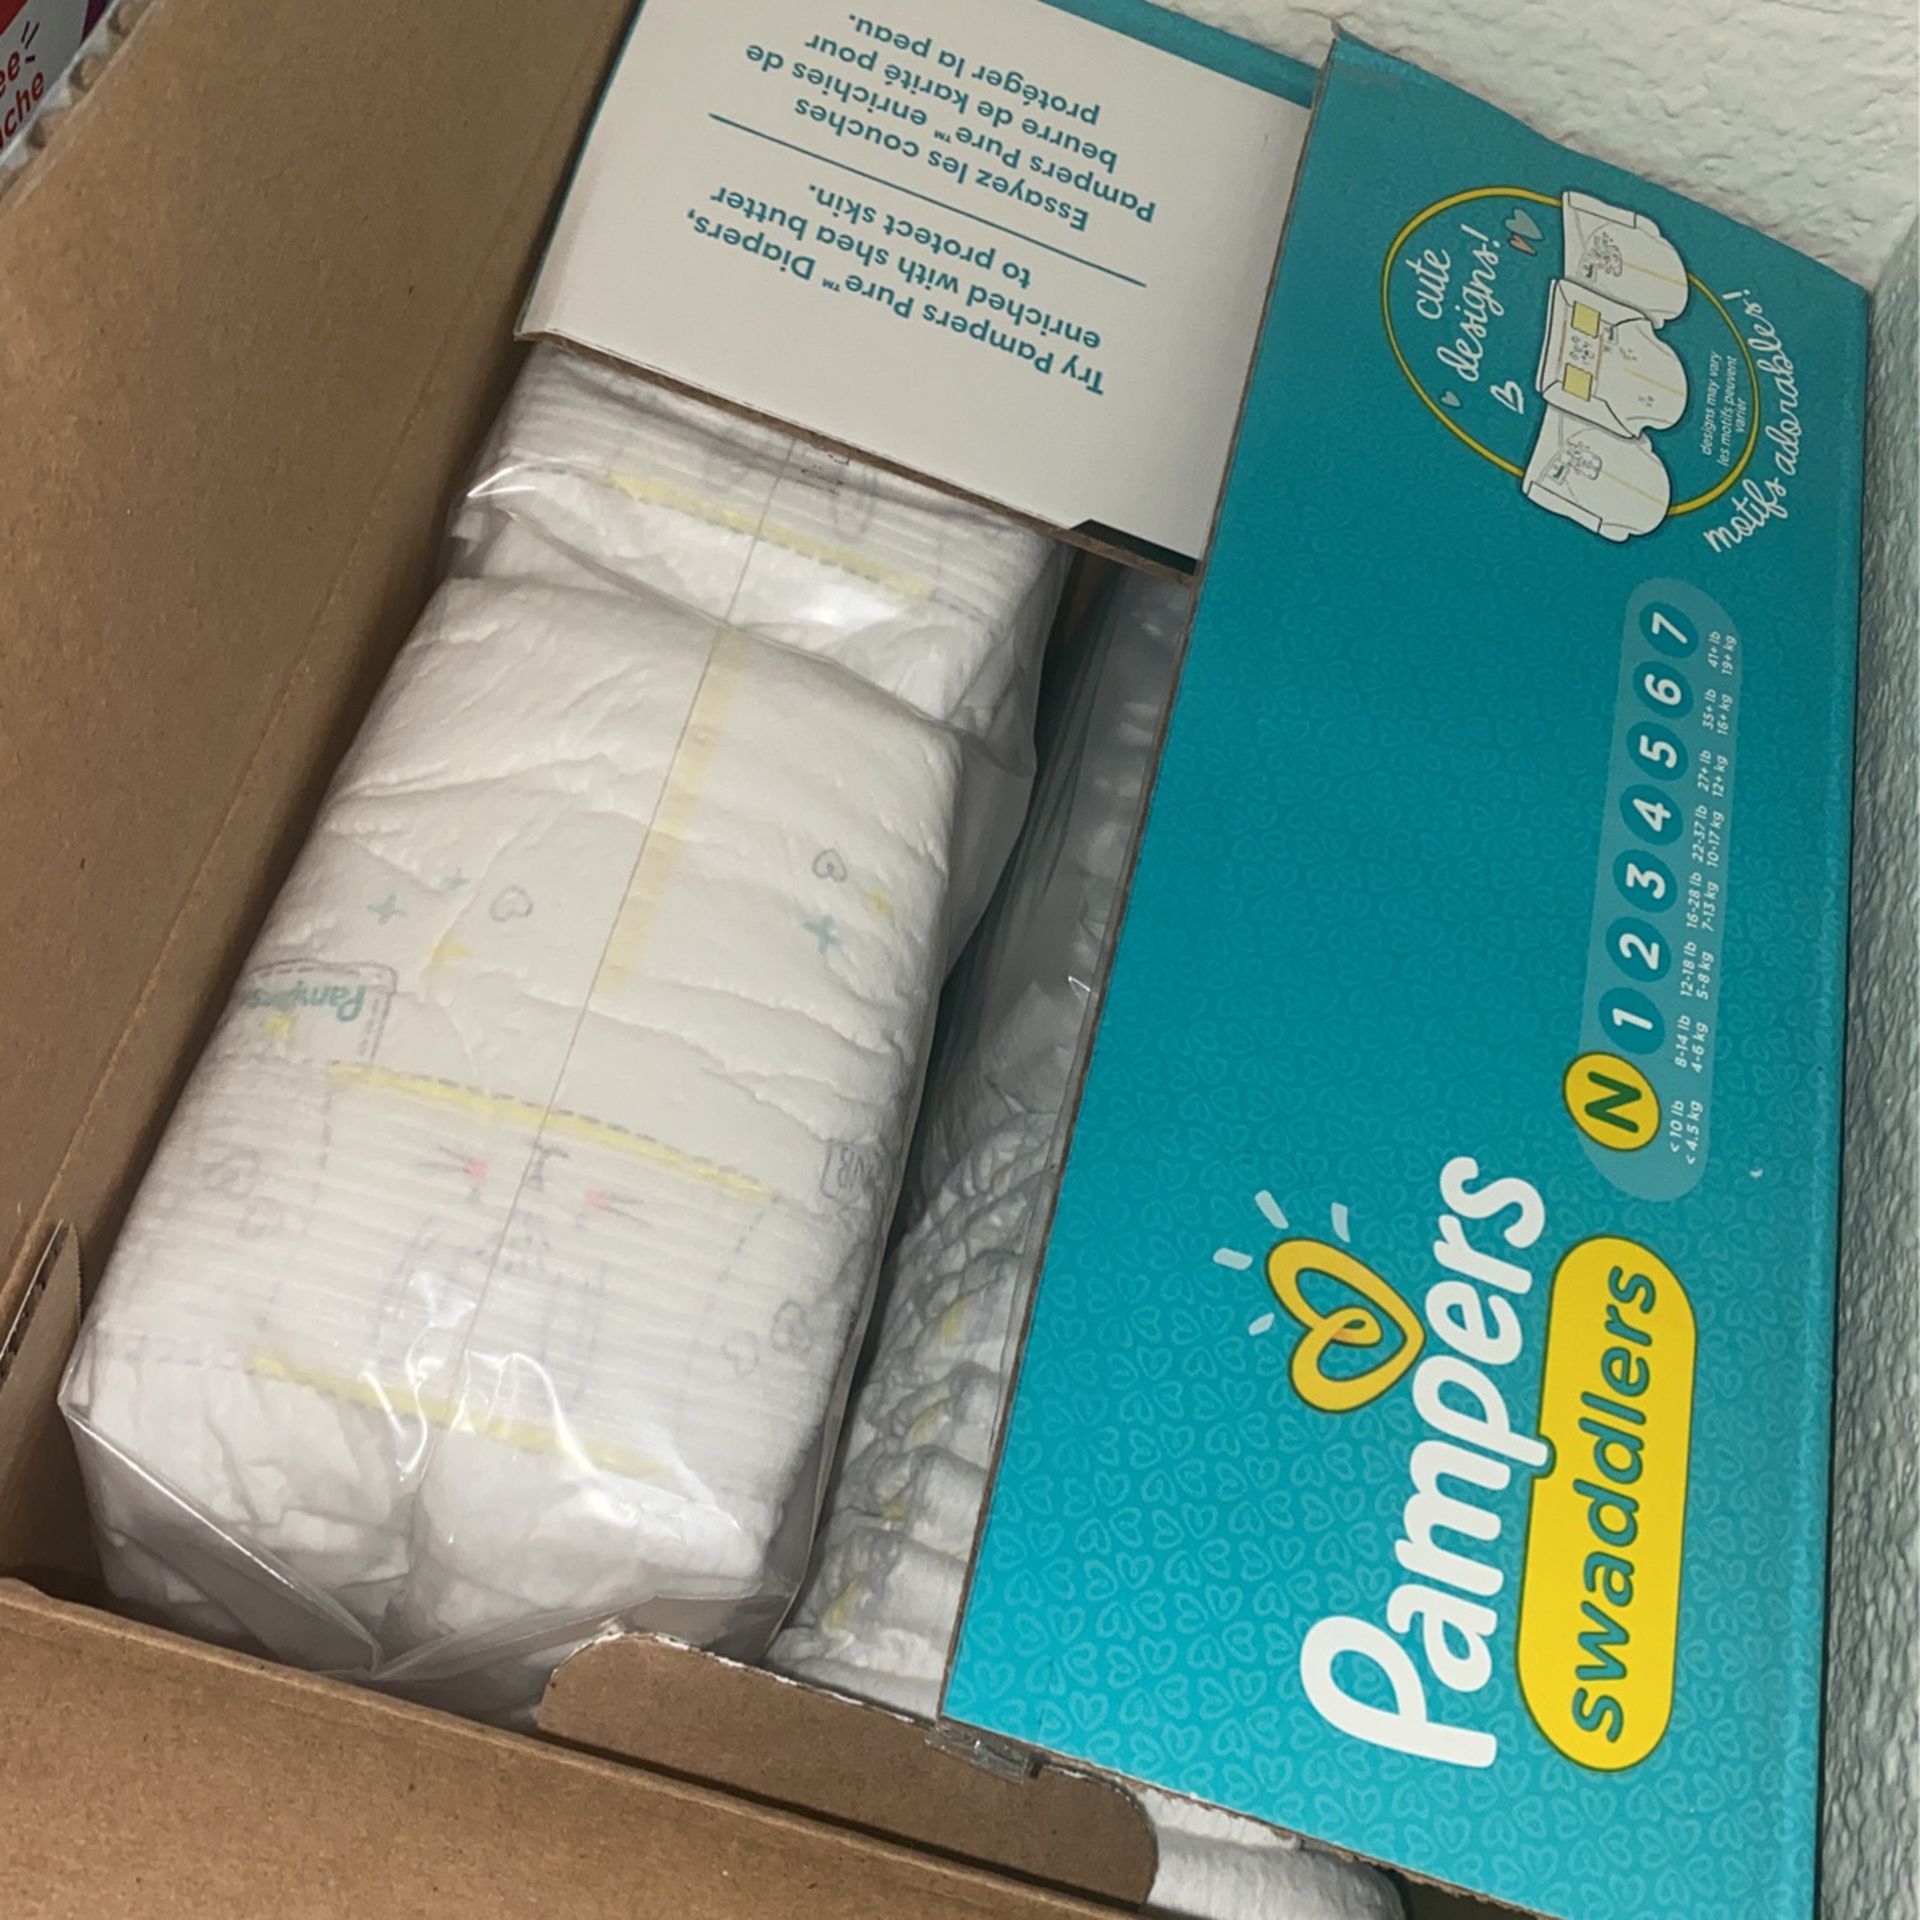 pampers diapers variety sizes newborn-size2